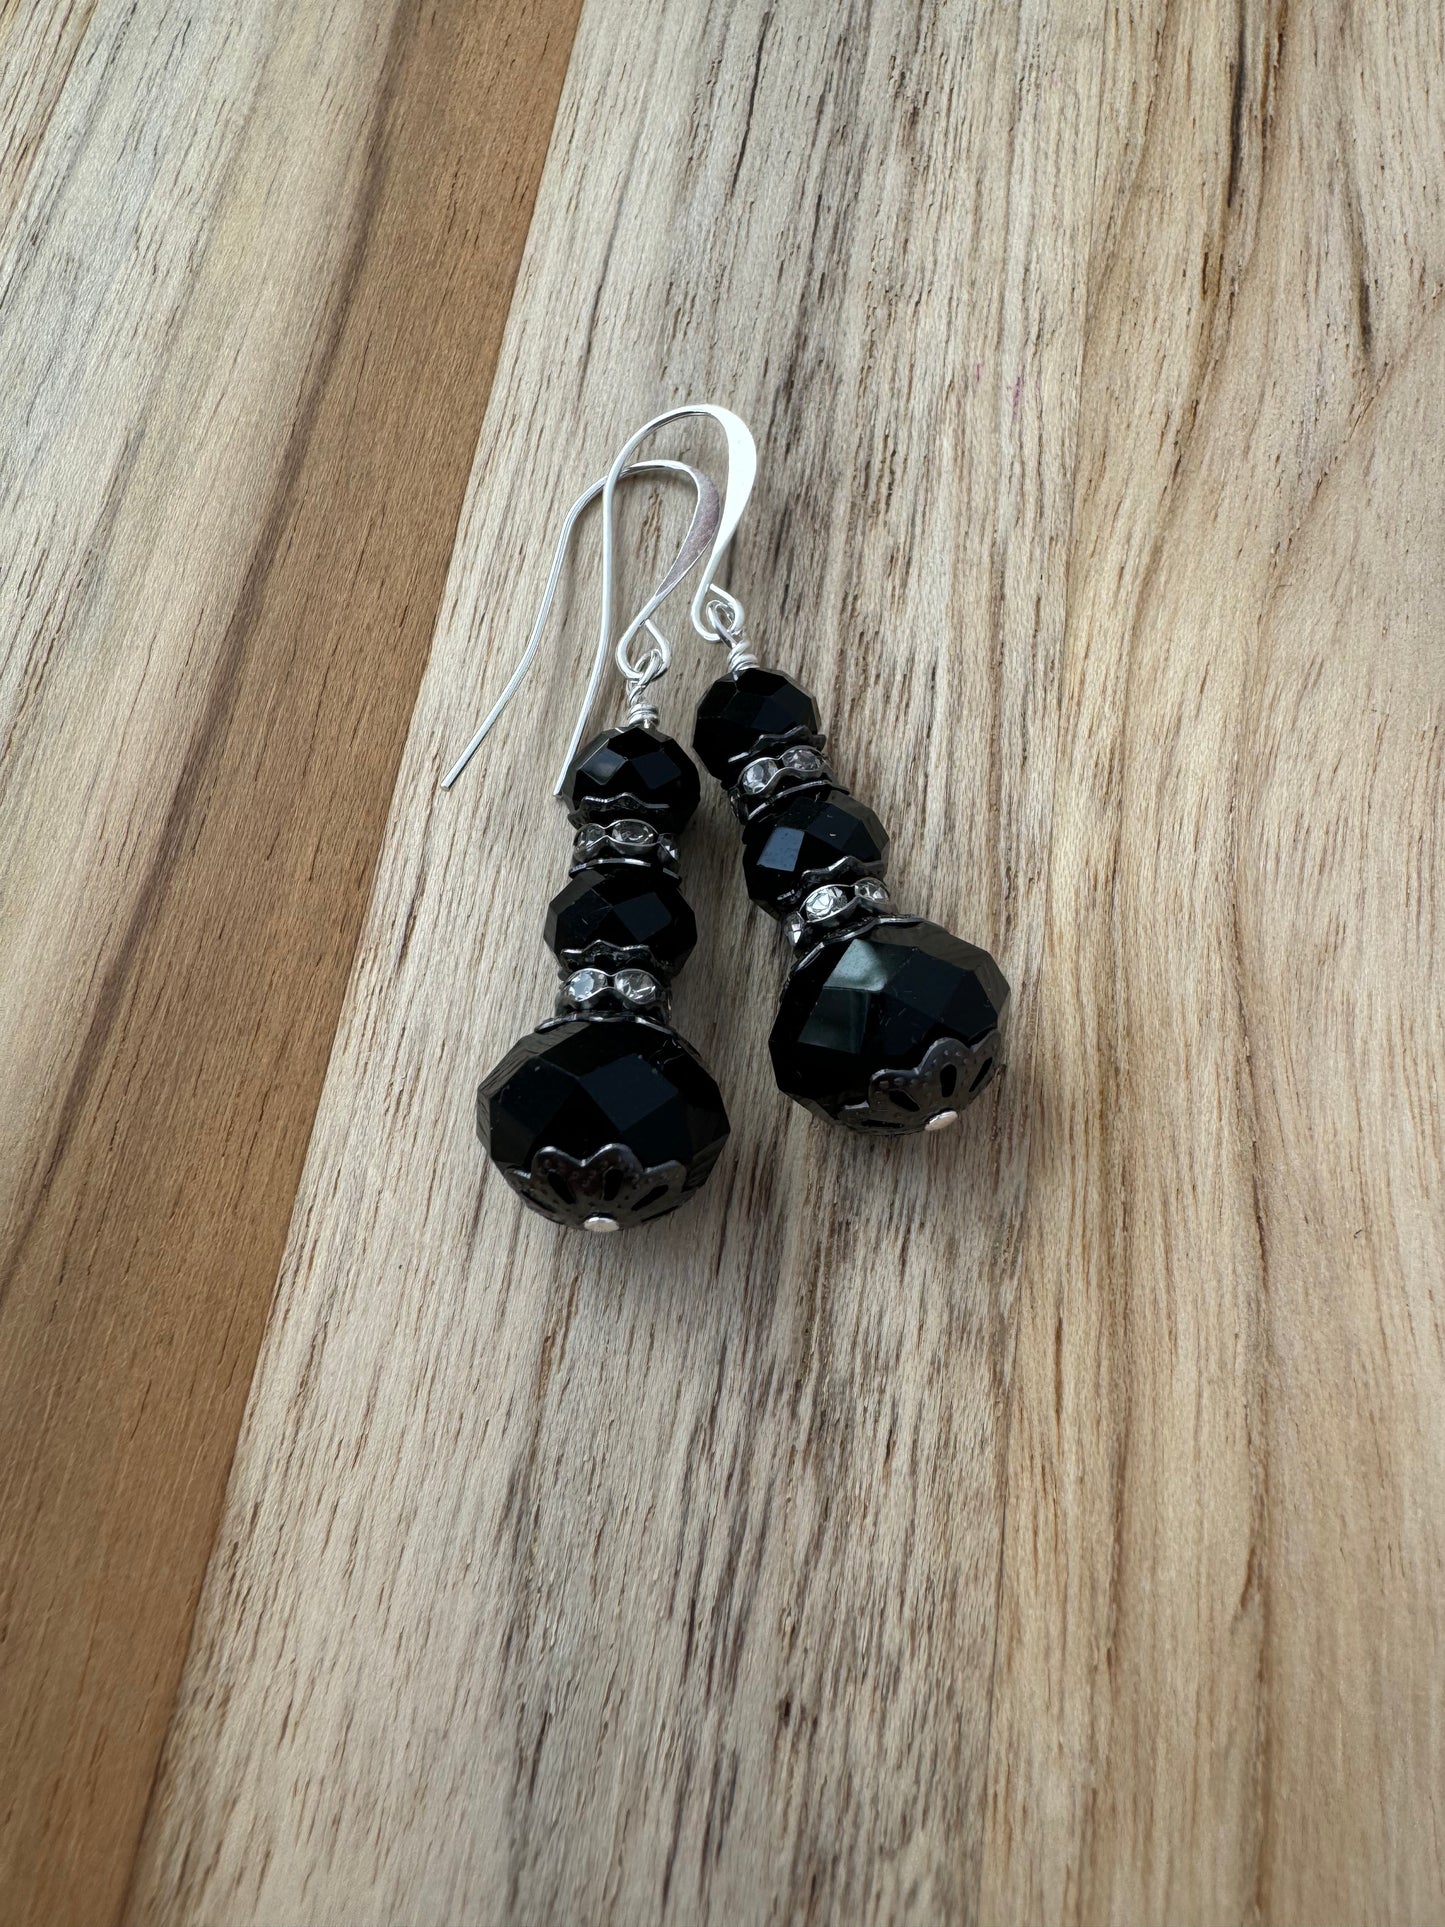 Black Cryastal Glass Dangle Earrings with Crystal Rondelle and Filigree Bead Caps - My Urban Gems